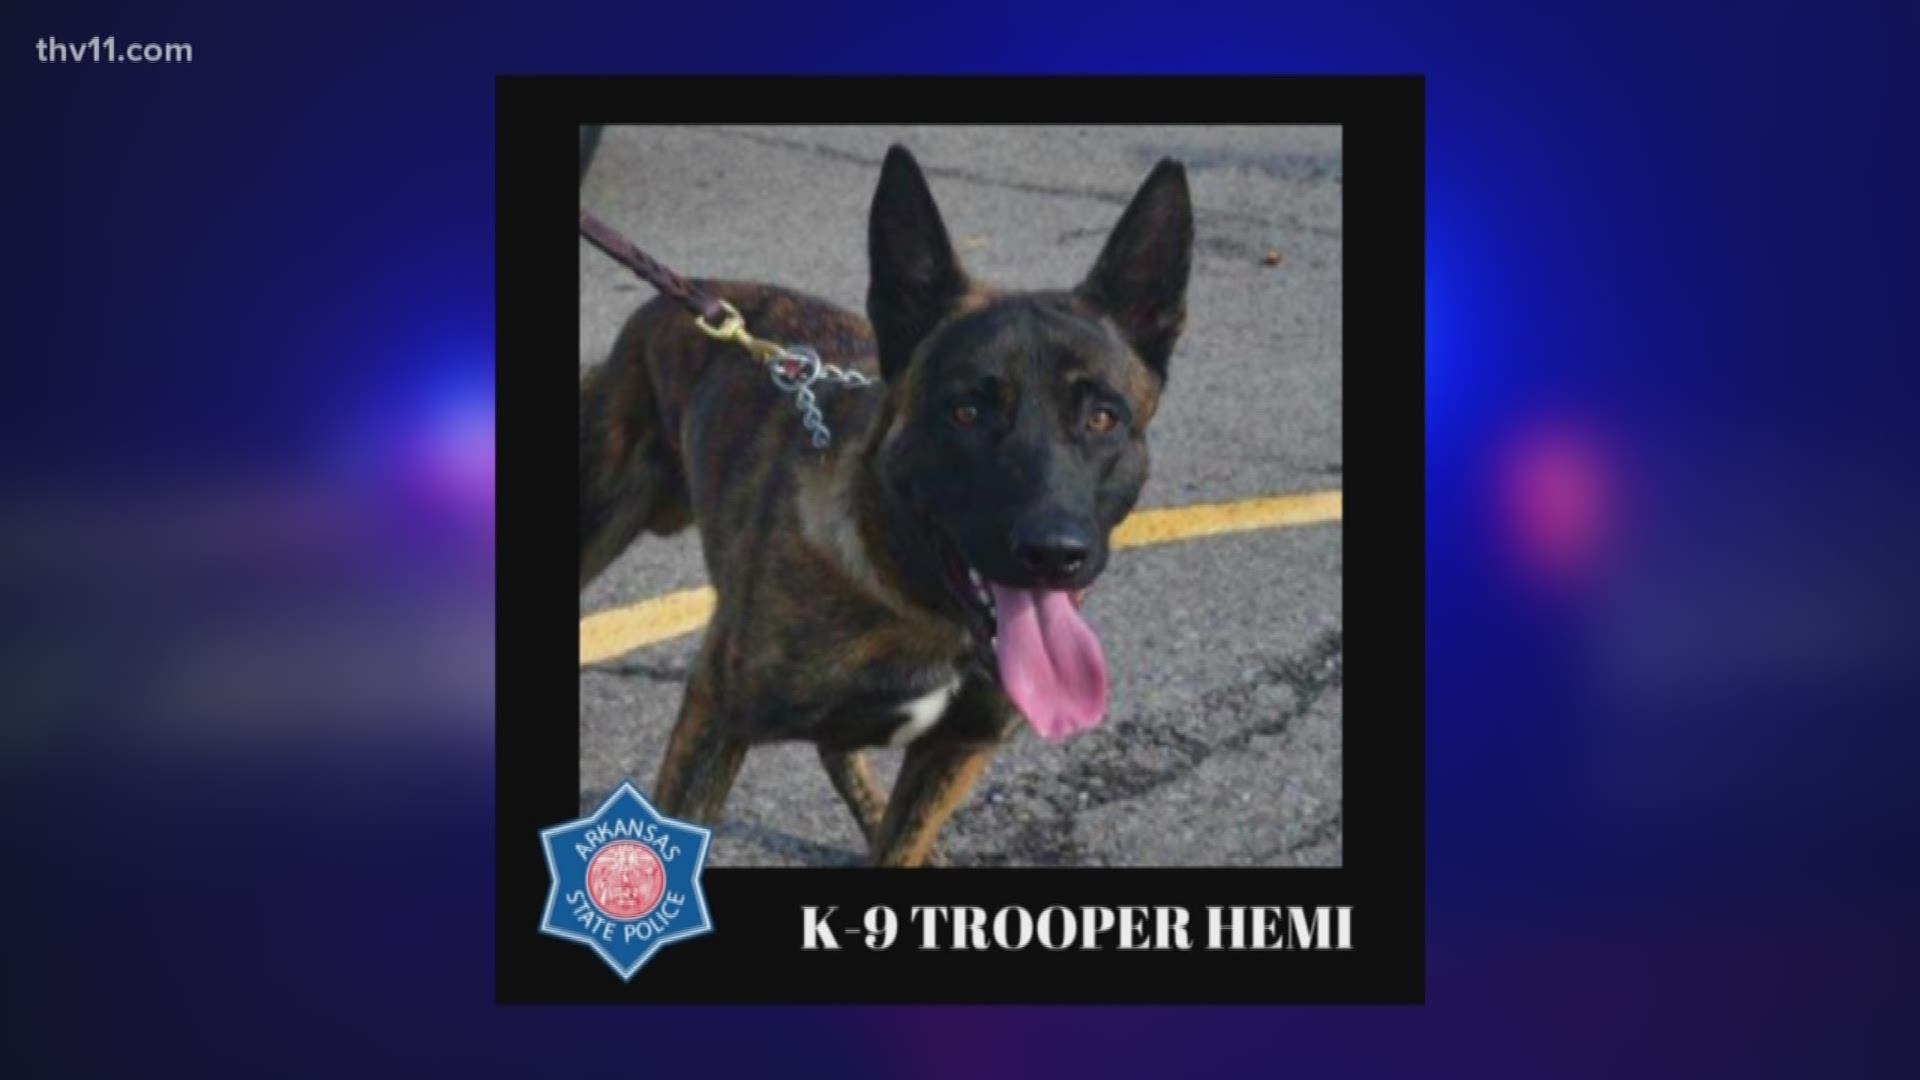 A man accused of shooting and killing a K-9 officer, dies in the hospital, after getting shot by troopers.